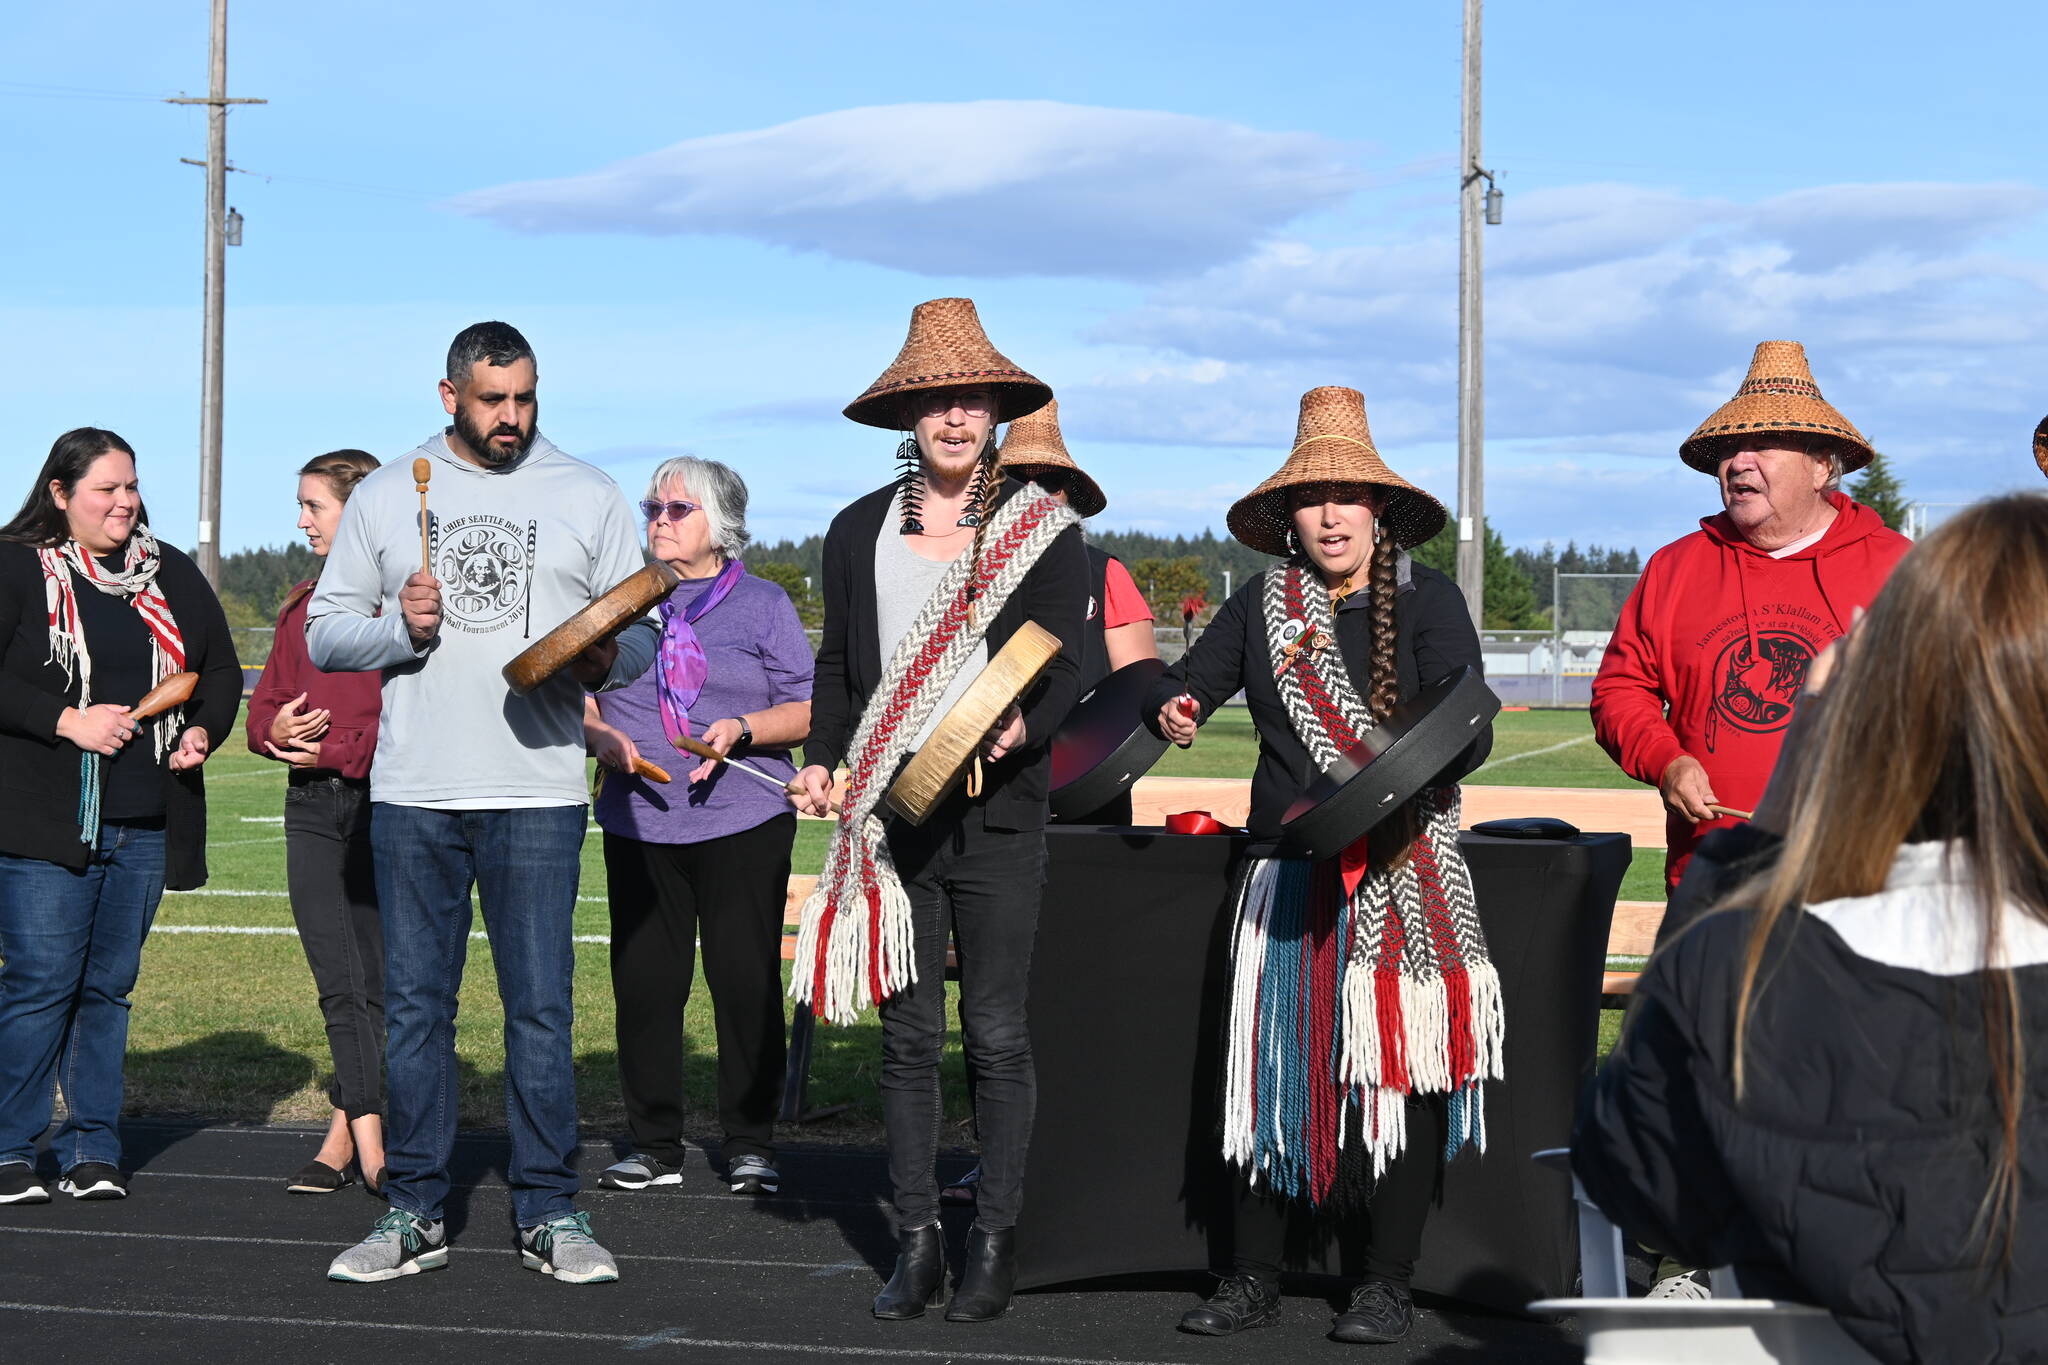 Sequim Gazette photo by Michael Dashiell / The S’Klallam Singers offer “Happy song” at the Sequim School District’s stadium and field naming ceremony on Sept. 16. The stadium was official named stáʔčəŋ, a S’Klallam word pronounced “stah-chung” and meaning “wolf,” and the field to Myron Teterud’s Field, after the longtime, late SHS sports fanatic.